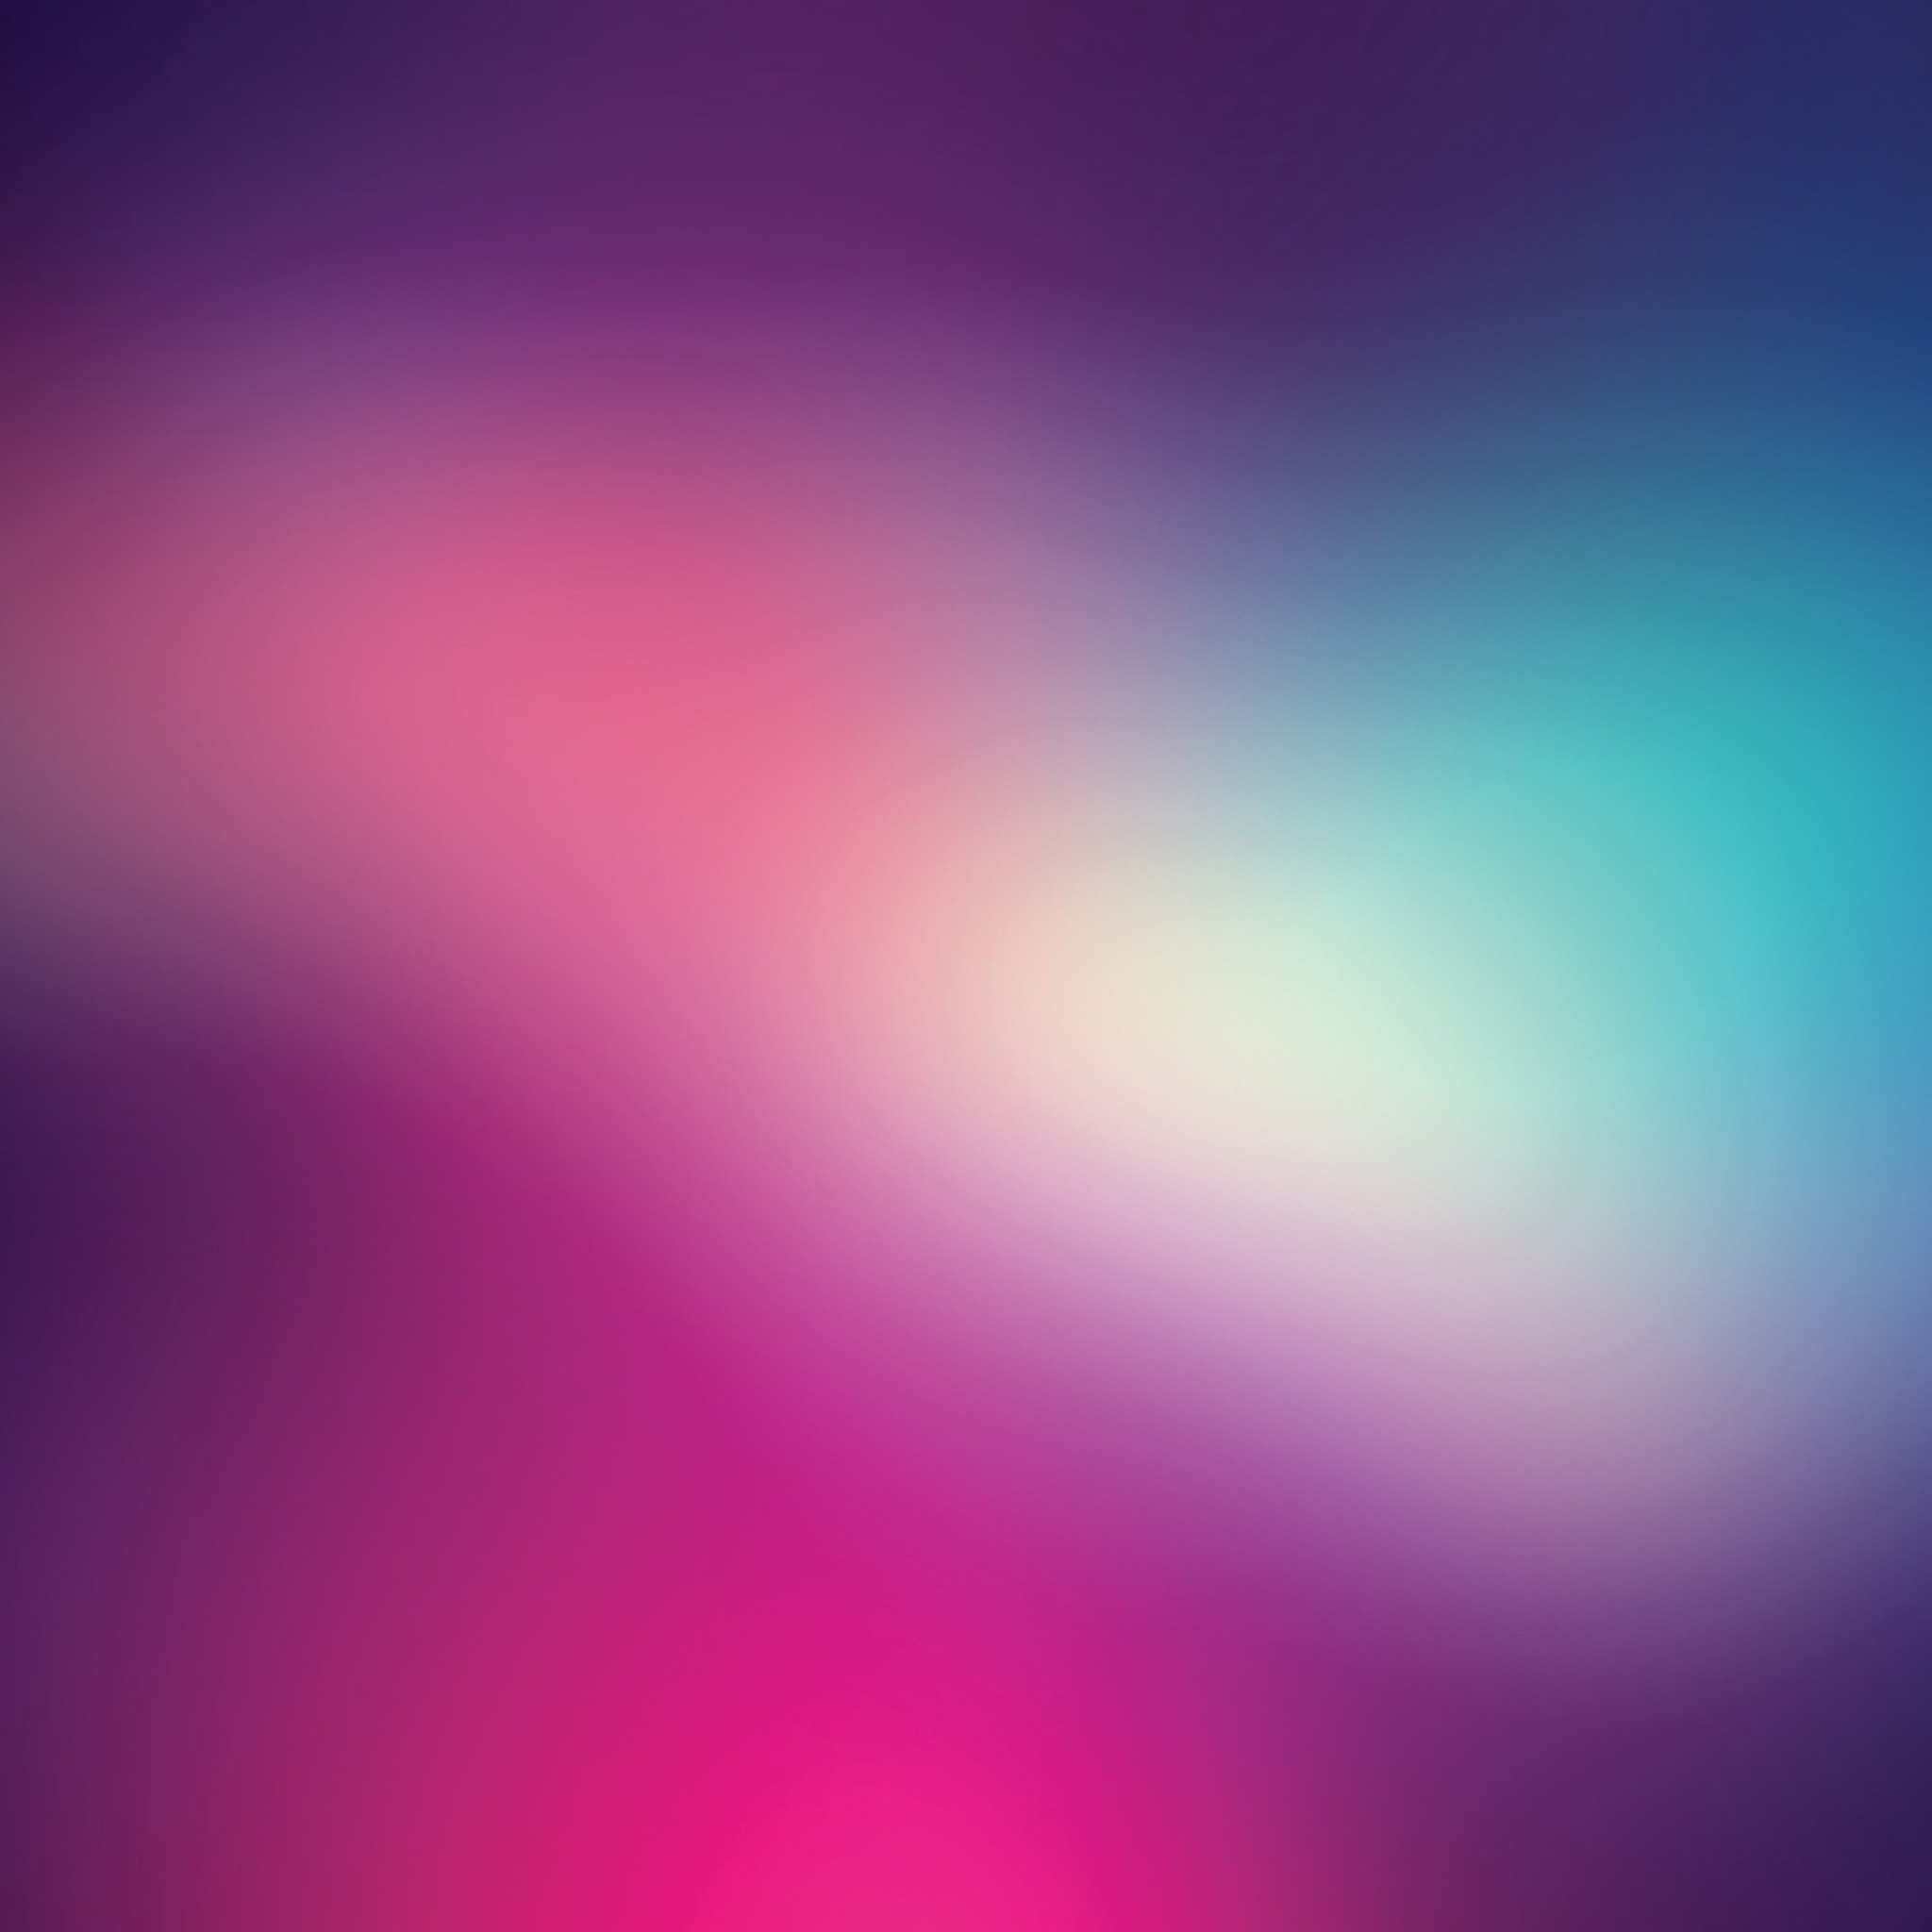 Abstract Purple Retina Wallpaper for iPhone Pro Max, X, 6